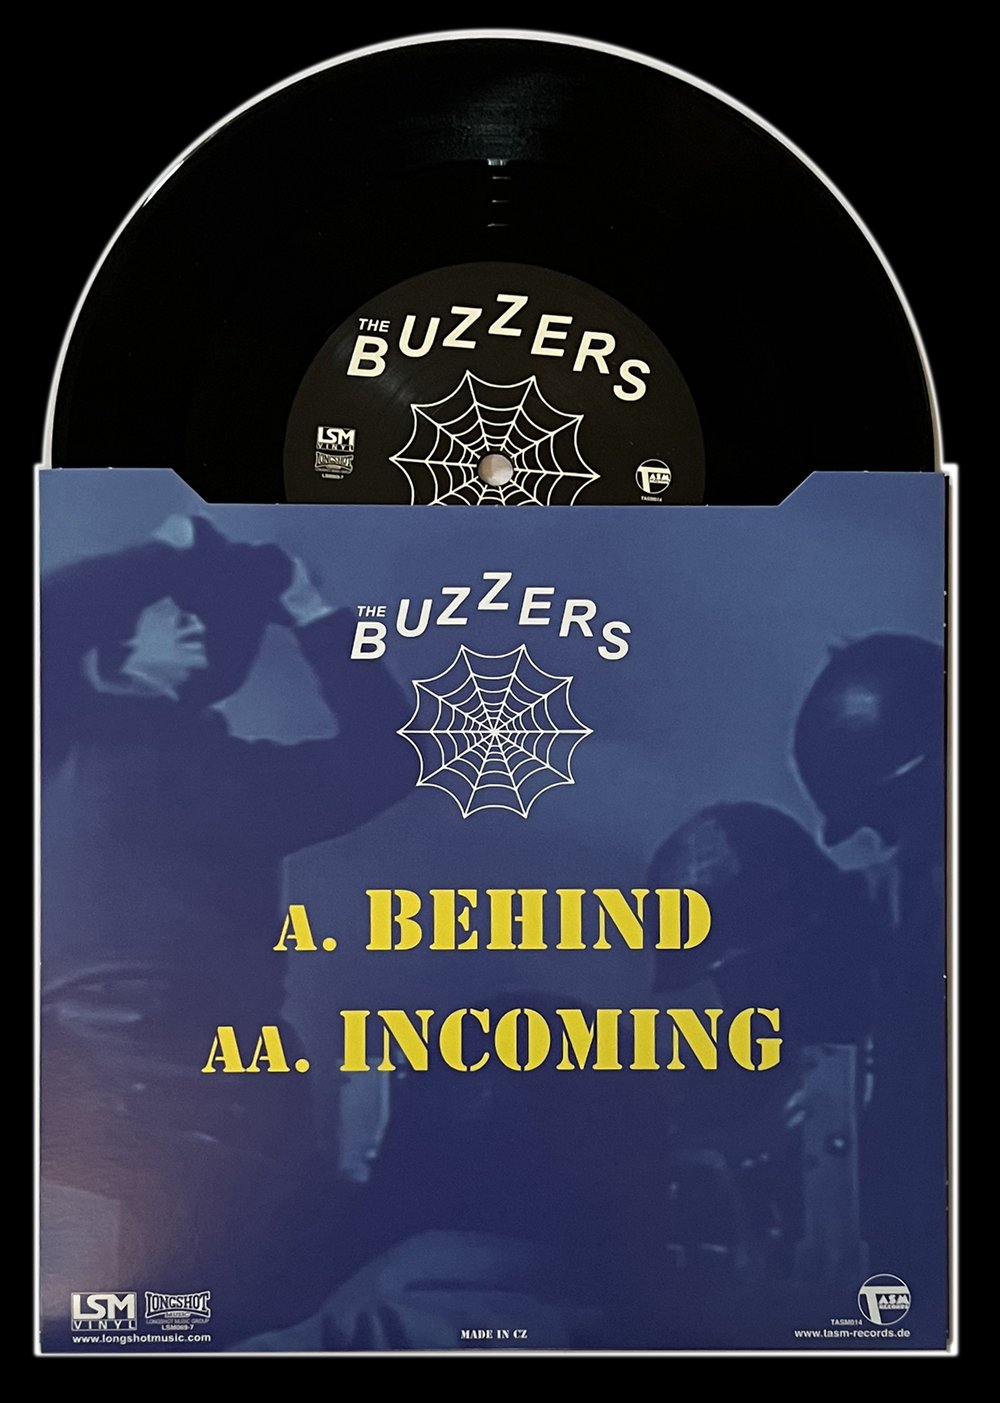 THE BUZZERS 'Behind' b/w 'Incoming'